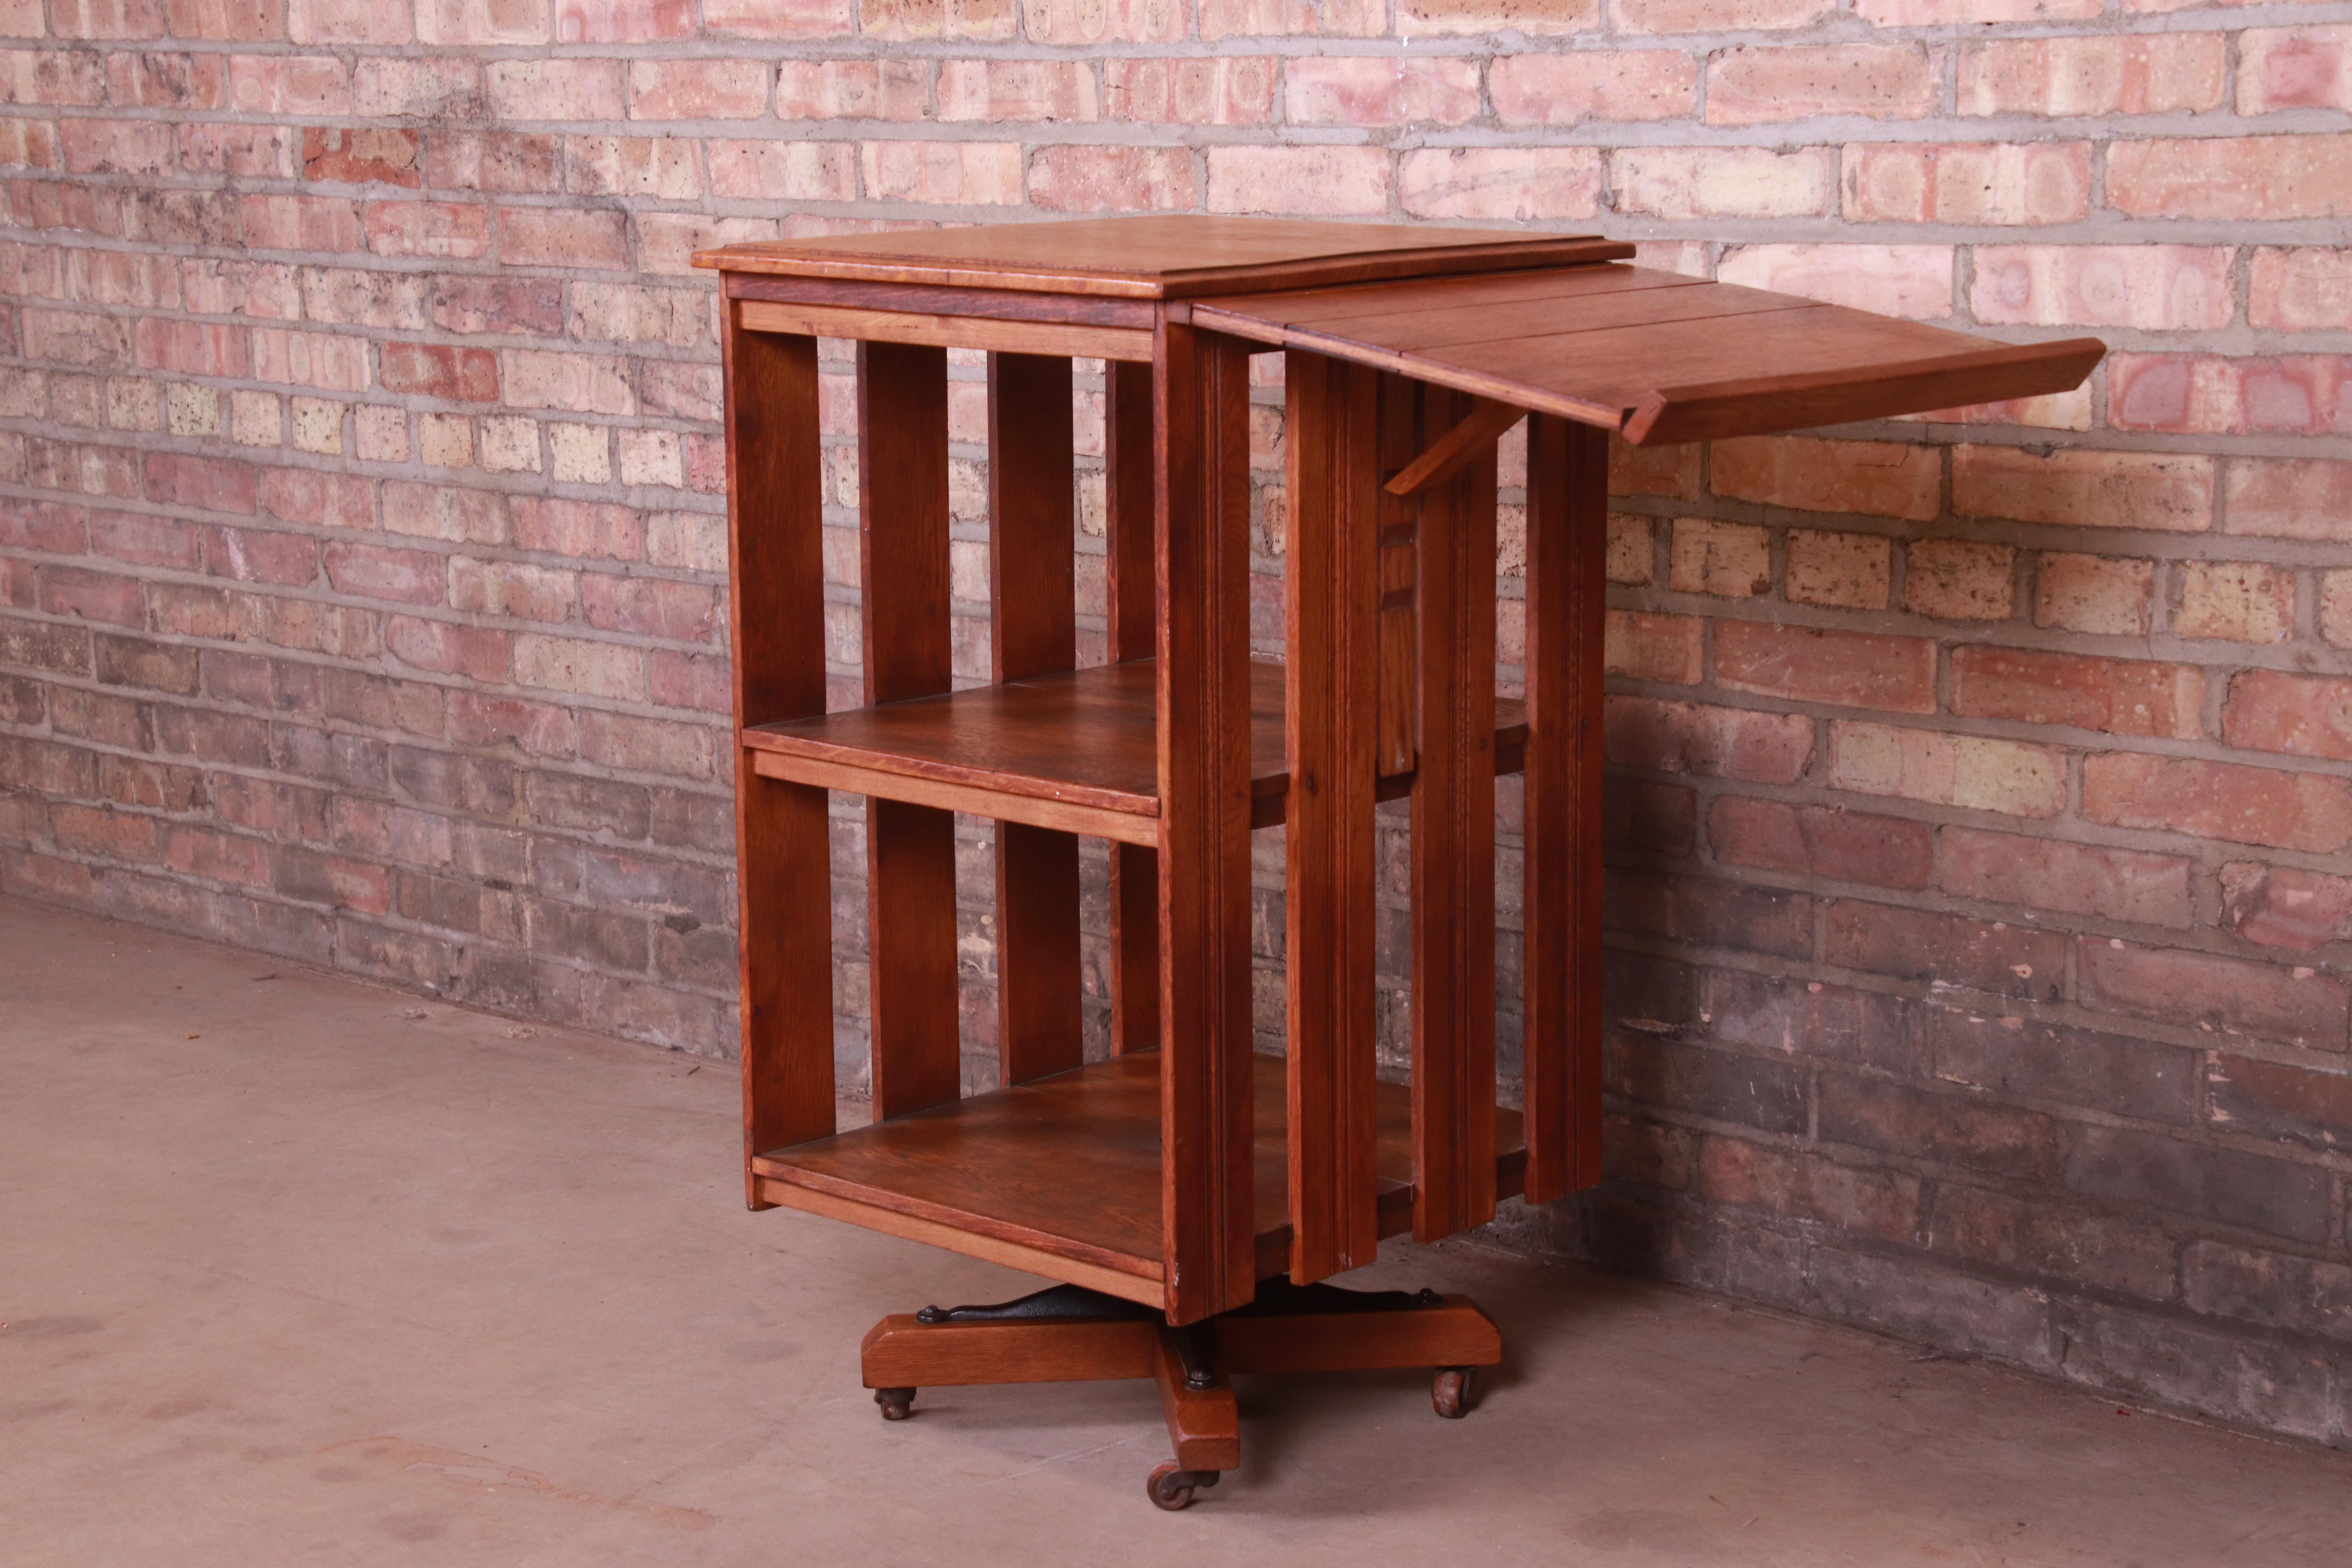 A gorgeous antique mission oak Arts & Crafts revolving bookcase with fold-up reading stand,

circa 1900

Measures: 17.38